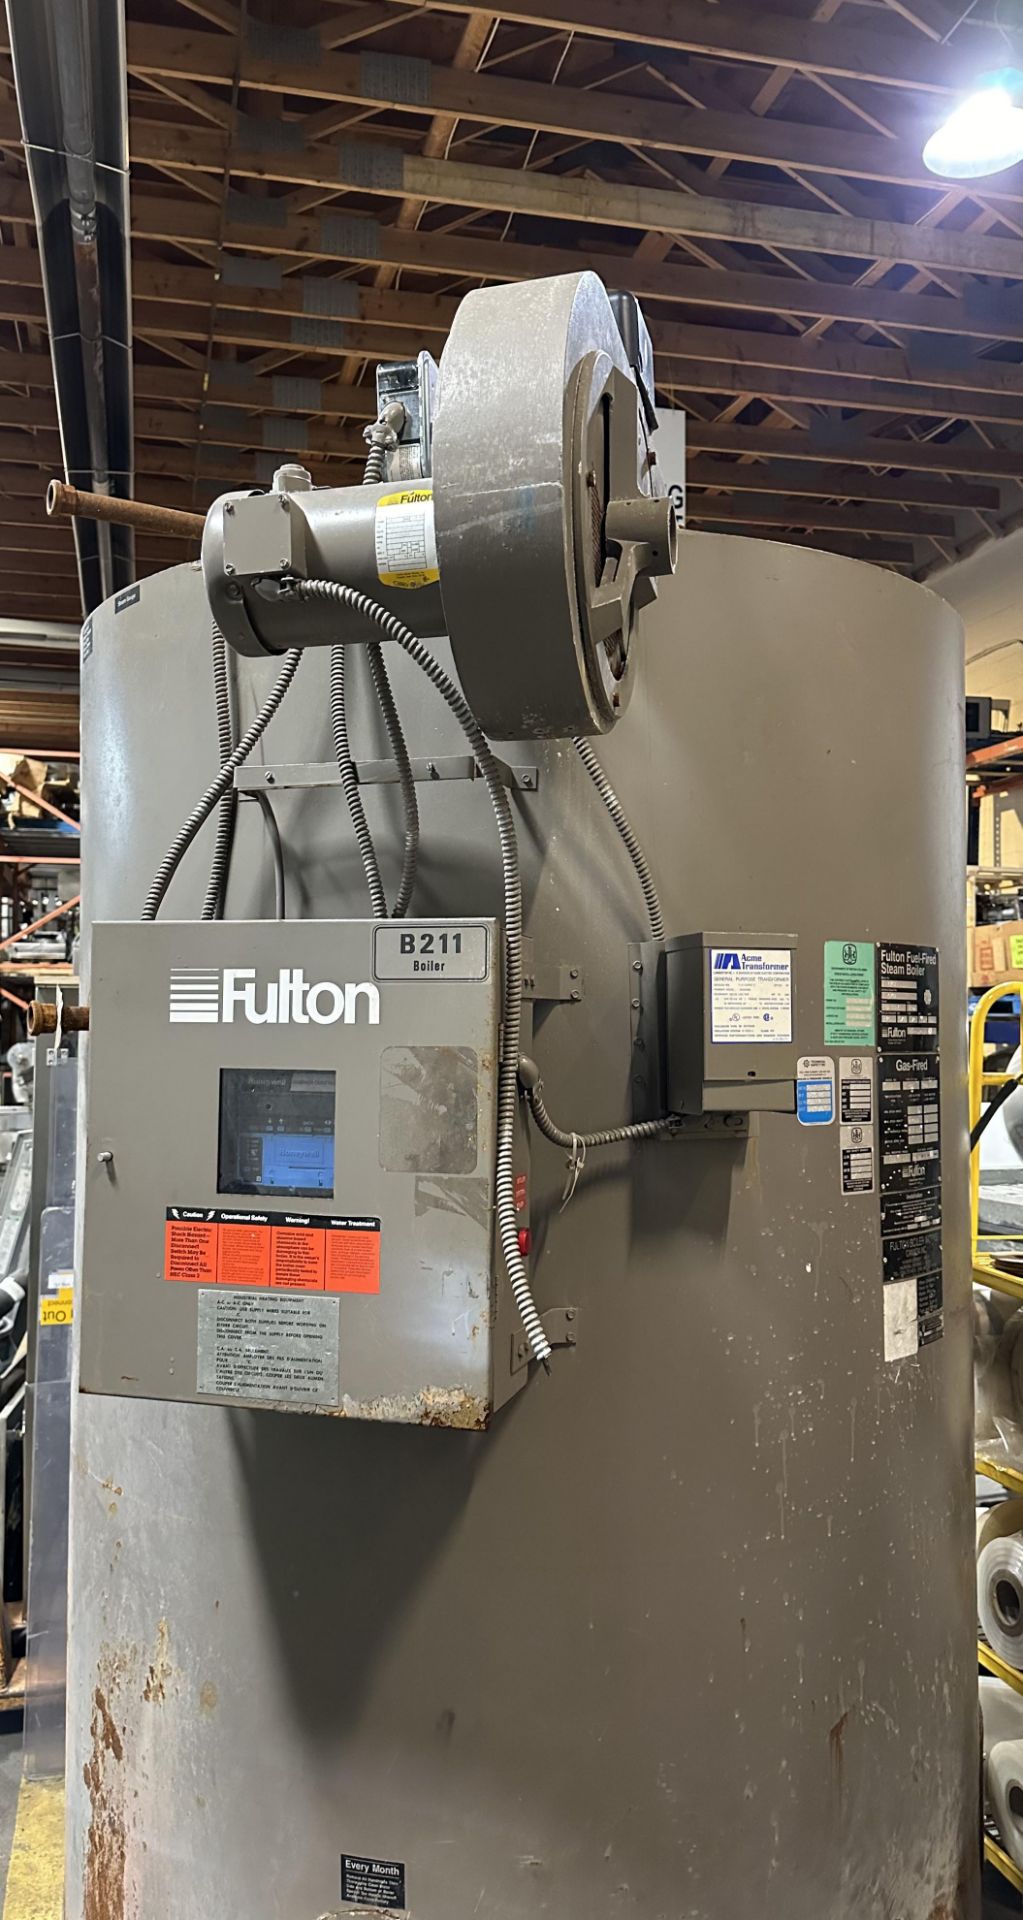 Fulton Boiler 50 HP - Natural Gas Boiler rated for 1725lbs Steam/hr. Fire/Water jackets are in - Image 3 of 20